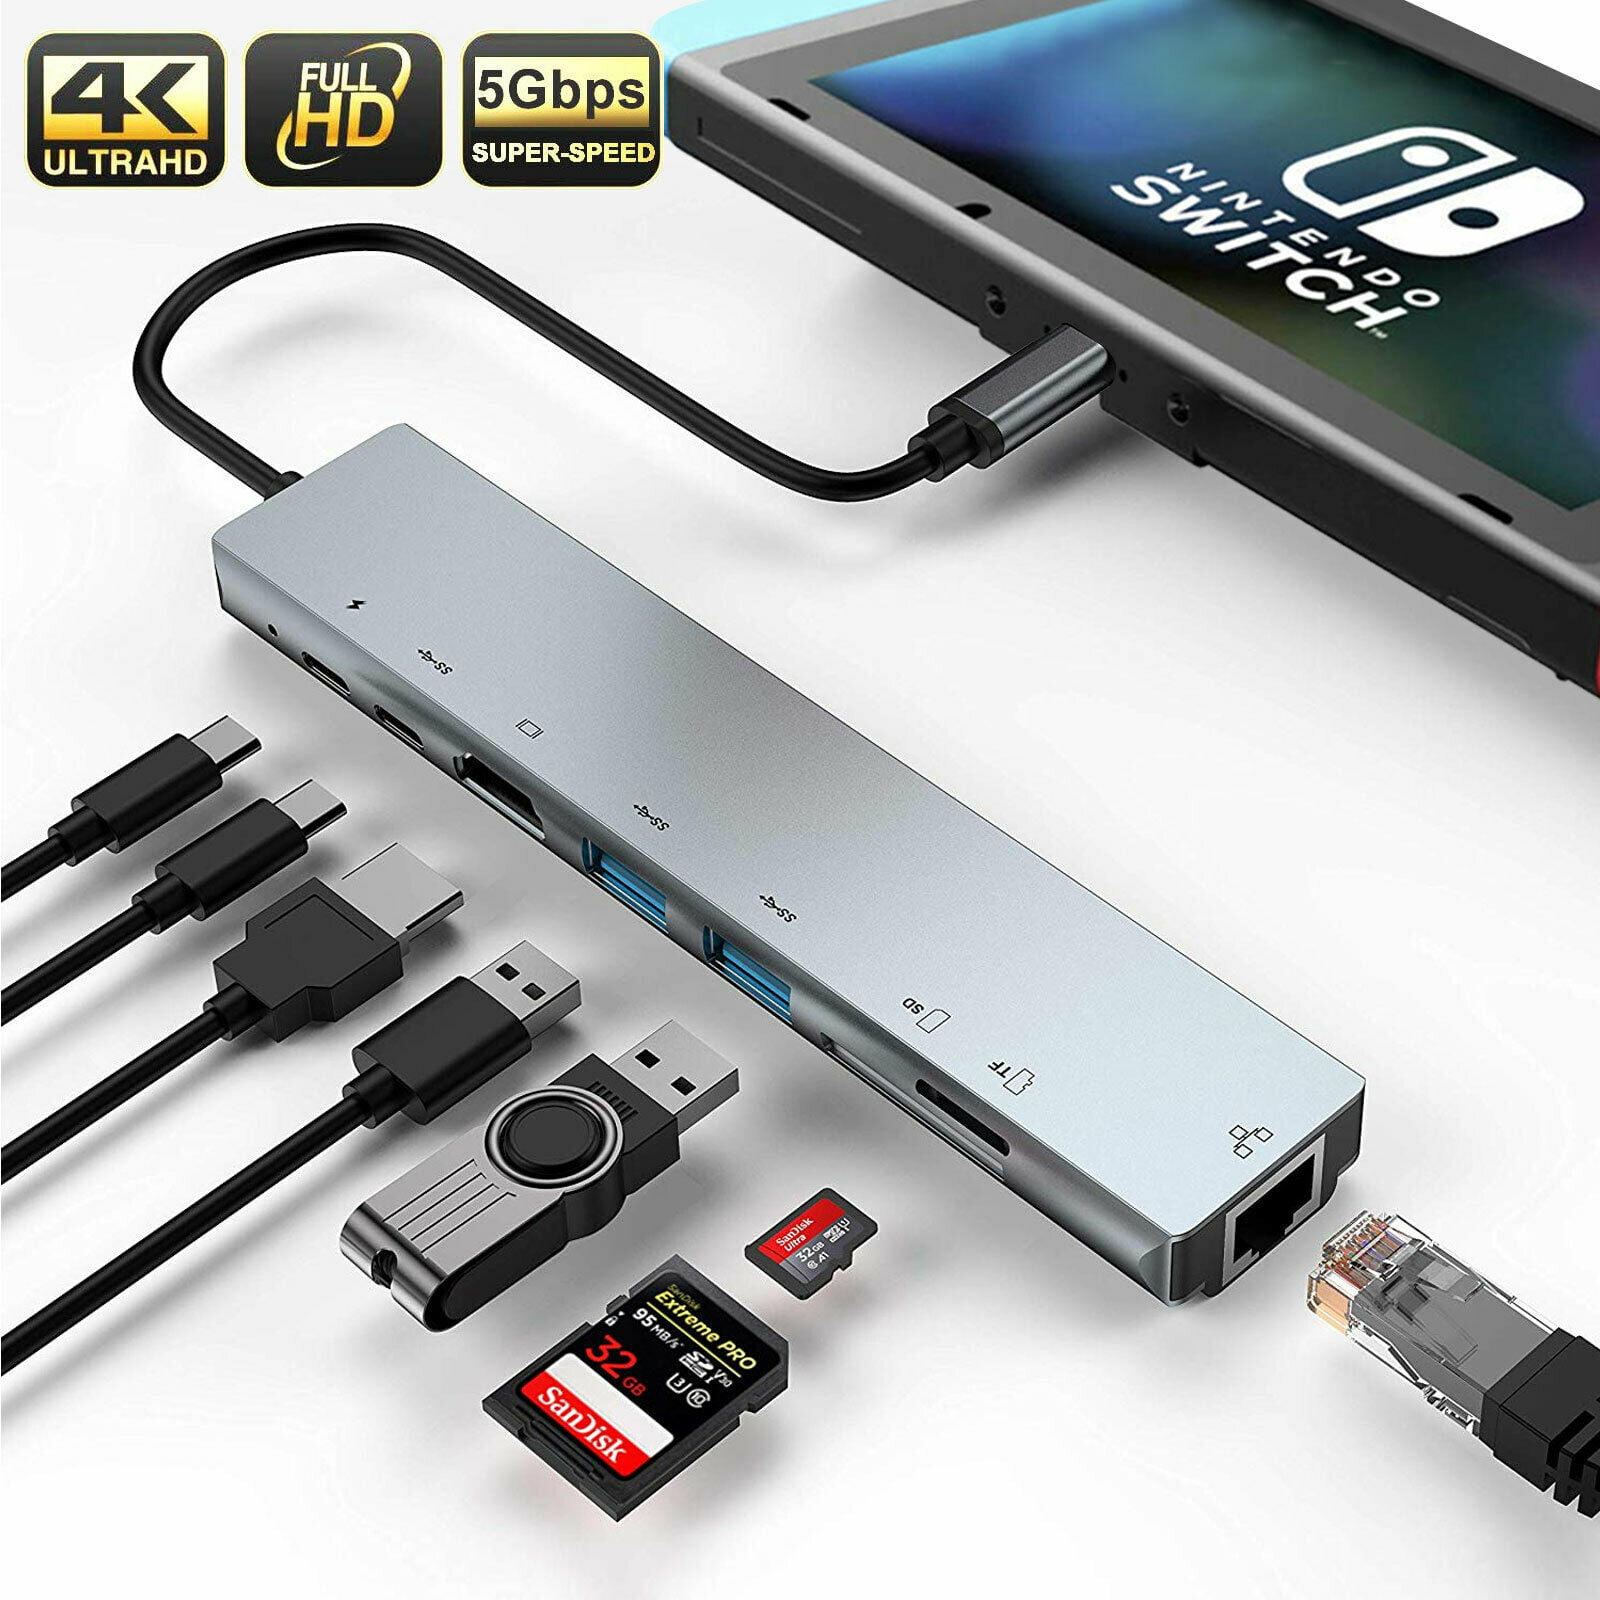 Super High‑Speed 5Gbps Transfer Rate Dock 4K High Definition Adapter Convenient for Mobile Office 5‑in‑1 Type‑C Hub to for HDMI+USB+PD Adapter USB C Hub 